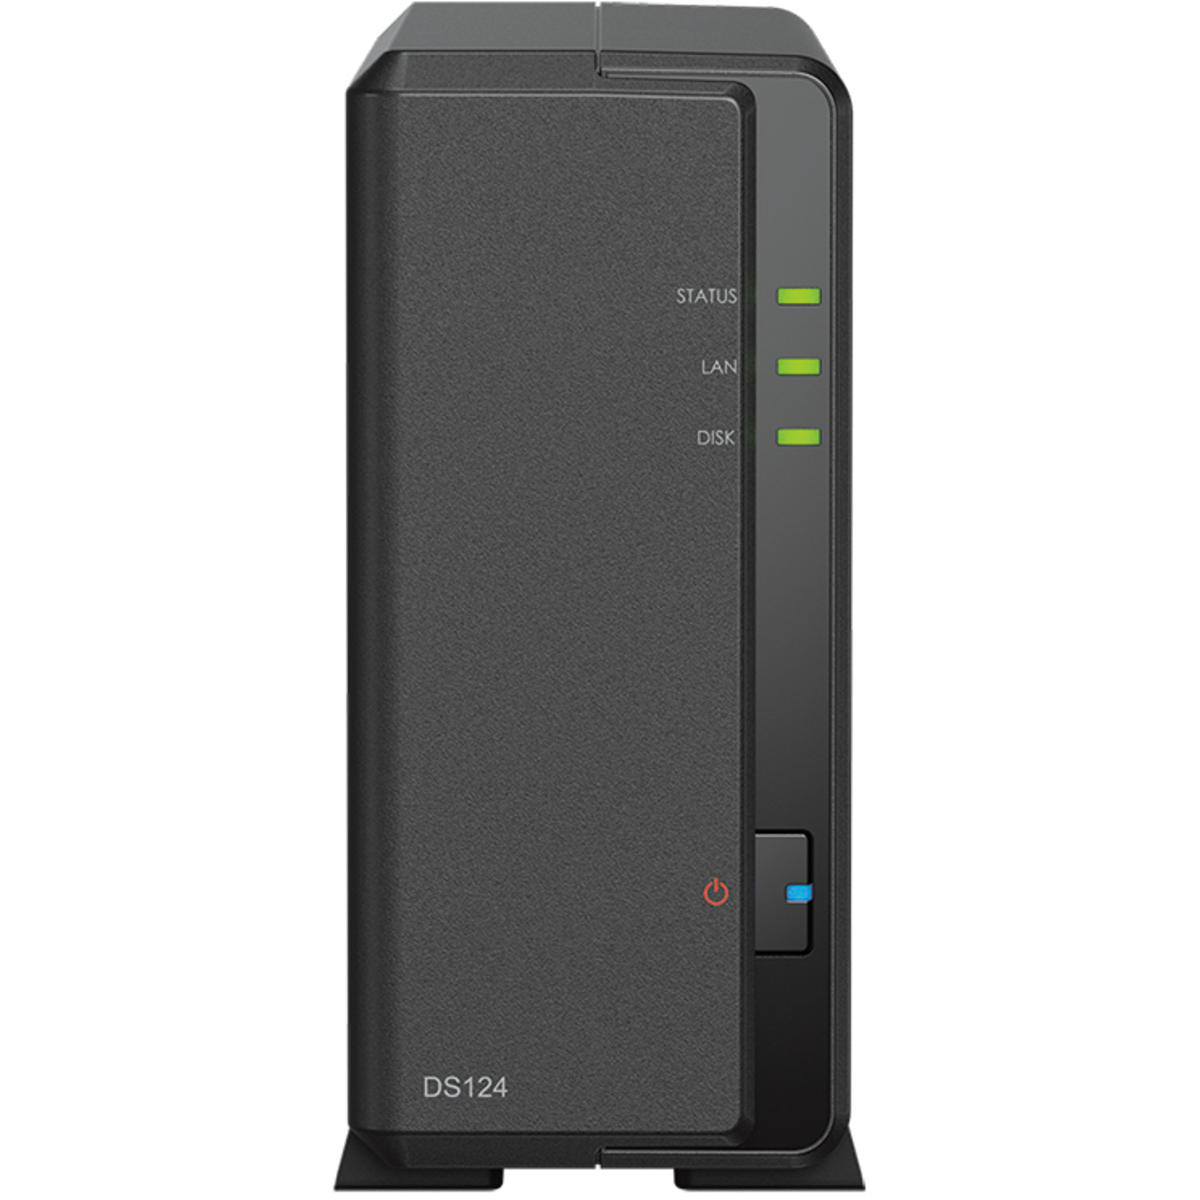 buy Synology DiskStation DS124 4tb Desktop NAS - Network Attached Storage Device 1x4000gb Samsung 870 EVO MZ-77E4T0BAM 2.5 560/530MB/s SATA 6Gb/s SSD CONSUMER Class Drives Installed - Burn-In Tested - nas headquarters buy network attached storage server device das new raid-5 free shipping usa spring sale DiskStation DS124